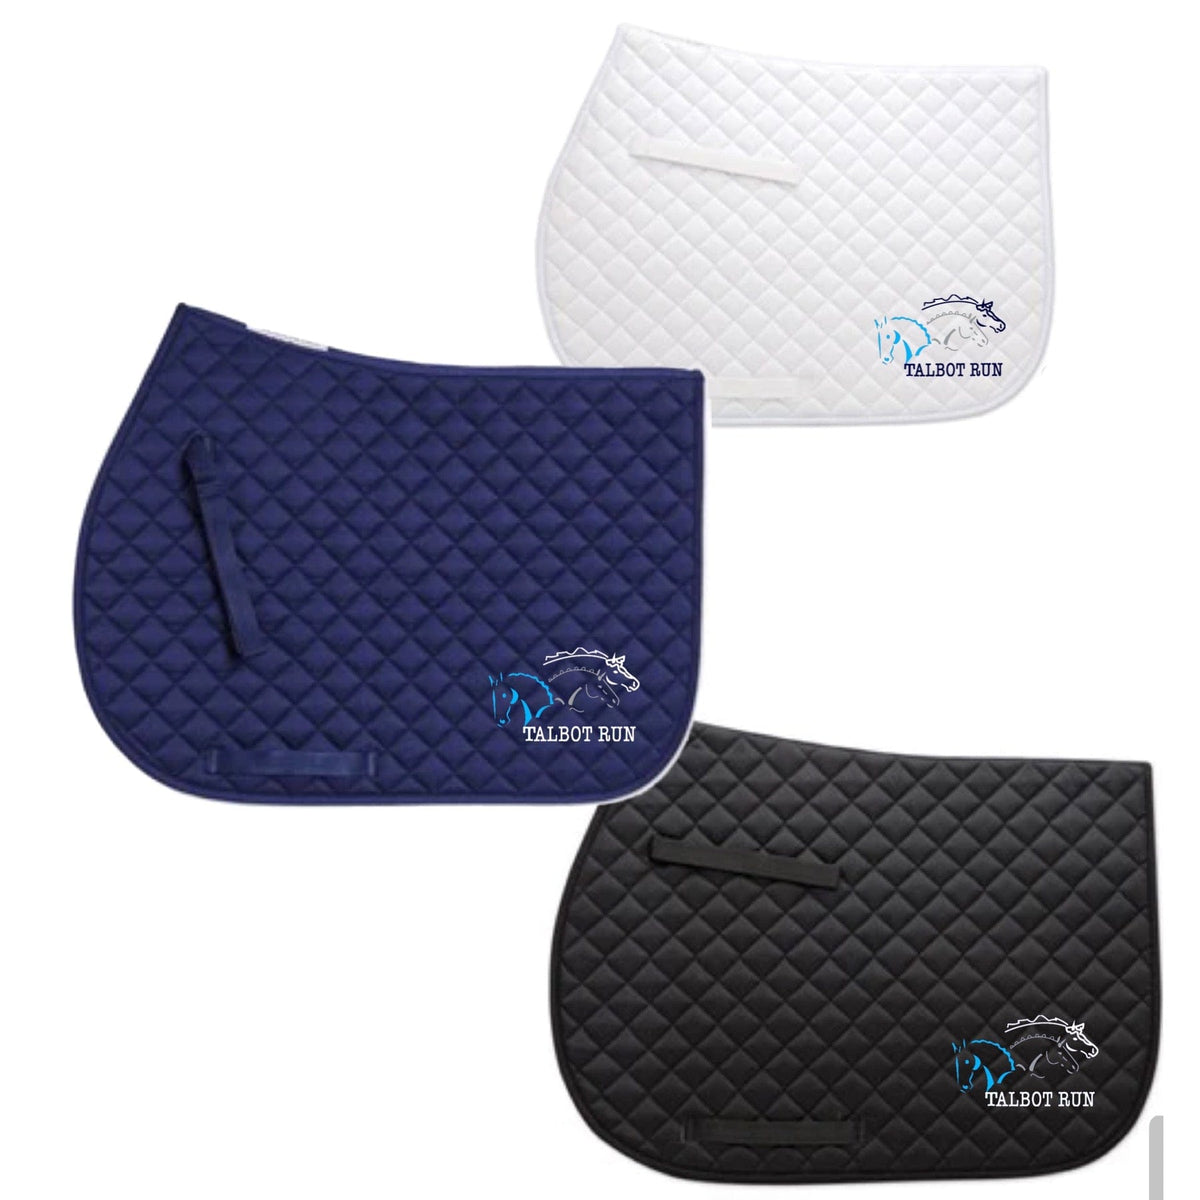 Equestrian Team Apparel Talbot Run Saddle Pads equestrian team apparel online tack store mobile tack store custom farm apparel custom show stable clothing equestrian lifestyle horse show clothing riding clothes horses equestrian tack store